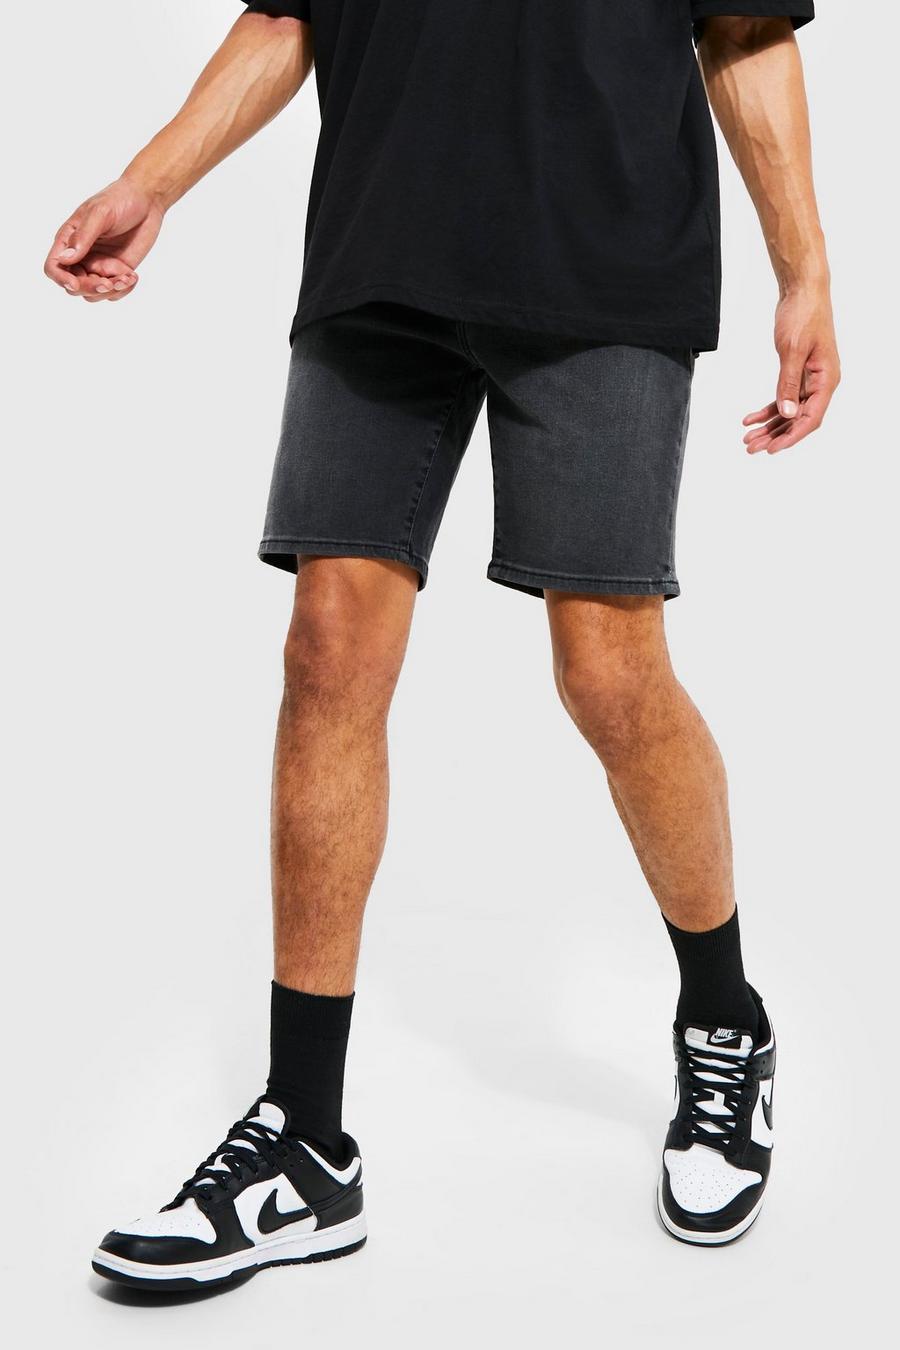 Tall Skinny Stretch Jeansshorts, Charcoal grey